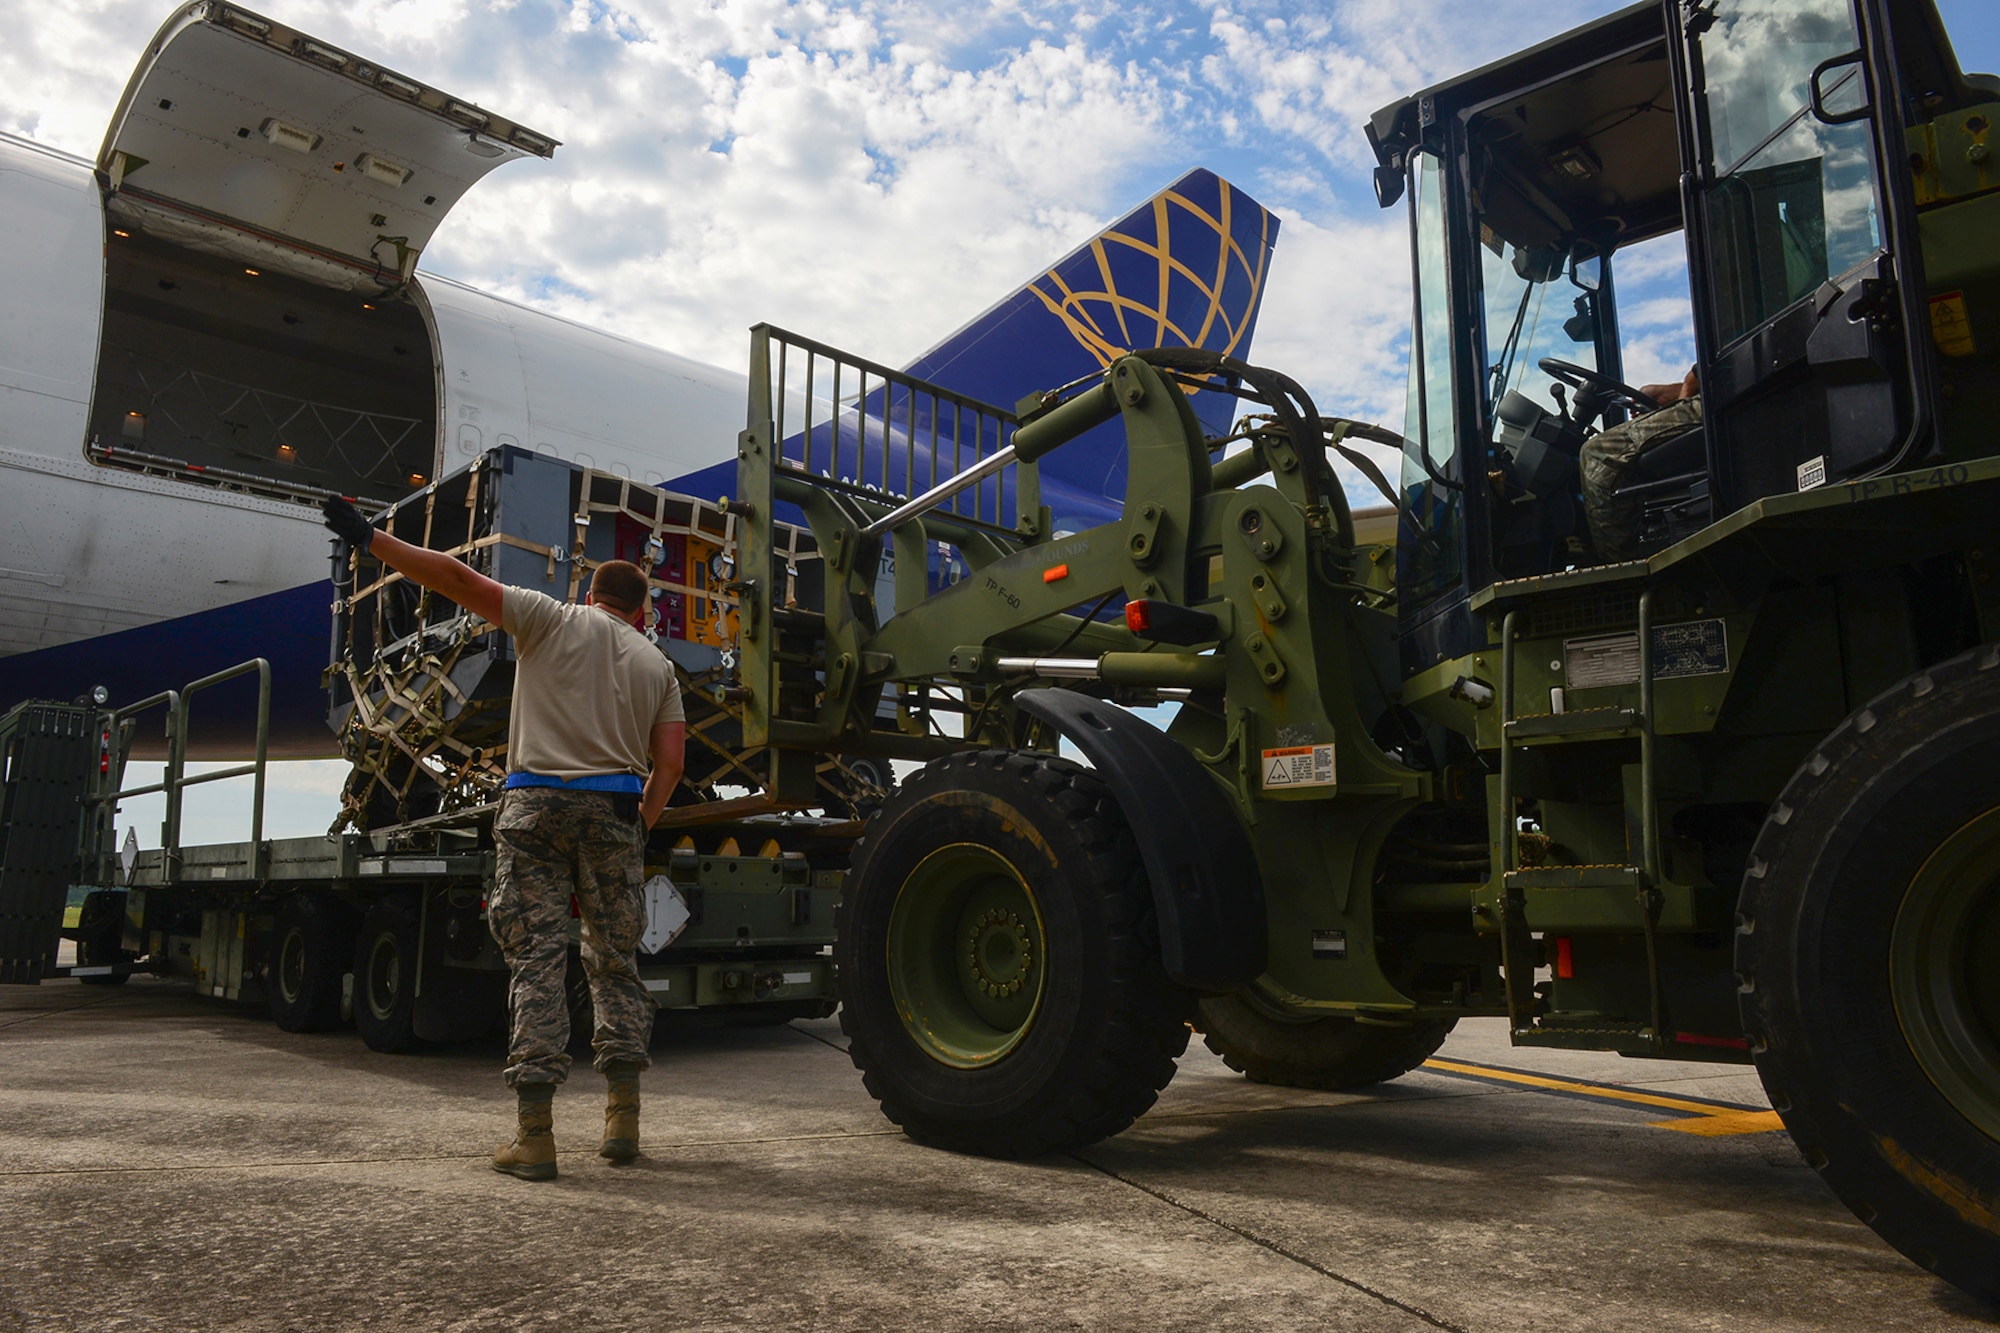 U.S. Air Force Tech. Sgt. Josh Williams, an air transportation specialist assigned to the 169th Logistics Readiness Squadron, guides a forklift carrying cargo at McEntire Joint National Guard Base, S.C., July 8, 2016. Approximately 300 U.S. Airmen and 12 F-16 Fighting Falcon jets from the 169th Fighter Wing at McEntire JNGB, S.C., are deploying to Osan Air Base, Republic of Korea, as the 157th Expeditionary Fighter Squadron in support of the U.S. Pacific Command Theater Security Package. (U.S. Air National Guard photo by Airman 1st Class Megan Floyd)